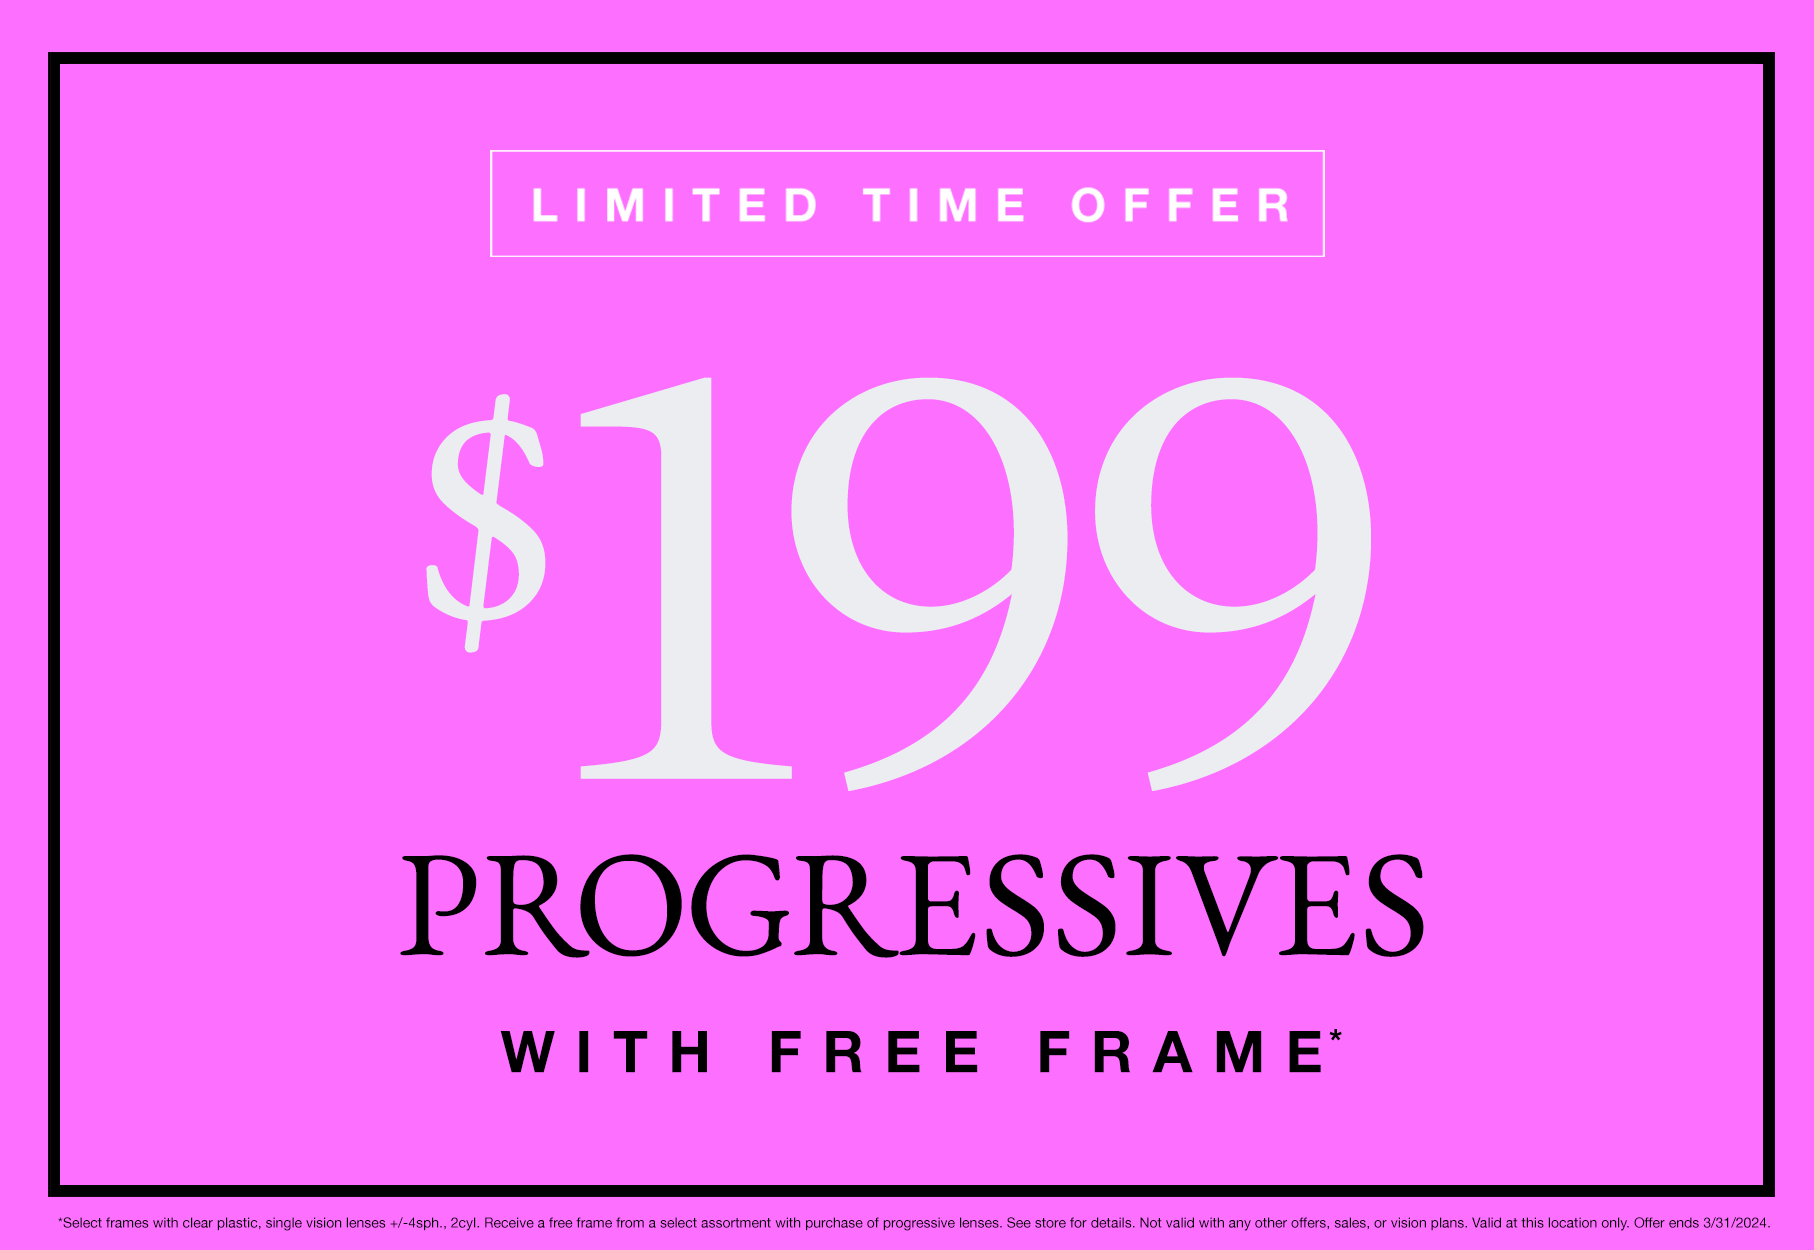 Text: Limited Time Offer $99 Progressives with free frame* *Select frames with clear plastic, single vision lenses +/-4sph., 2cyl. Receive a free frame from a select assortment with purchase of progressive lenses. See store for details. Not valid with any other offers, sales, or vision plans. Valid at this location only. Offer ends 3/31/2024. Limited Time Offer 2 pairs of eyeglasses for $99* *Select frames with clear plastic, single vision lenses +/-4sph., 2cyl. Receive a free frame from a select assortment with purchase of progressive lenses. See store for details. Not valid with any other offers, sales, or vision plans. Valid at this location only. Offer ends 3/31/2024. Photo: Alternating pink and black background